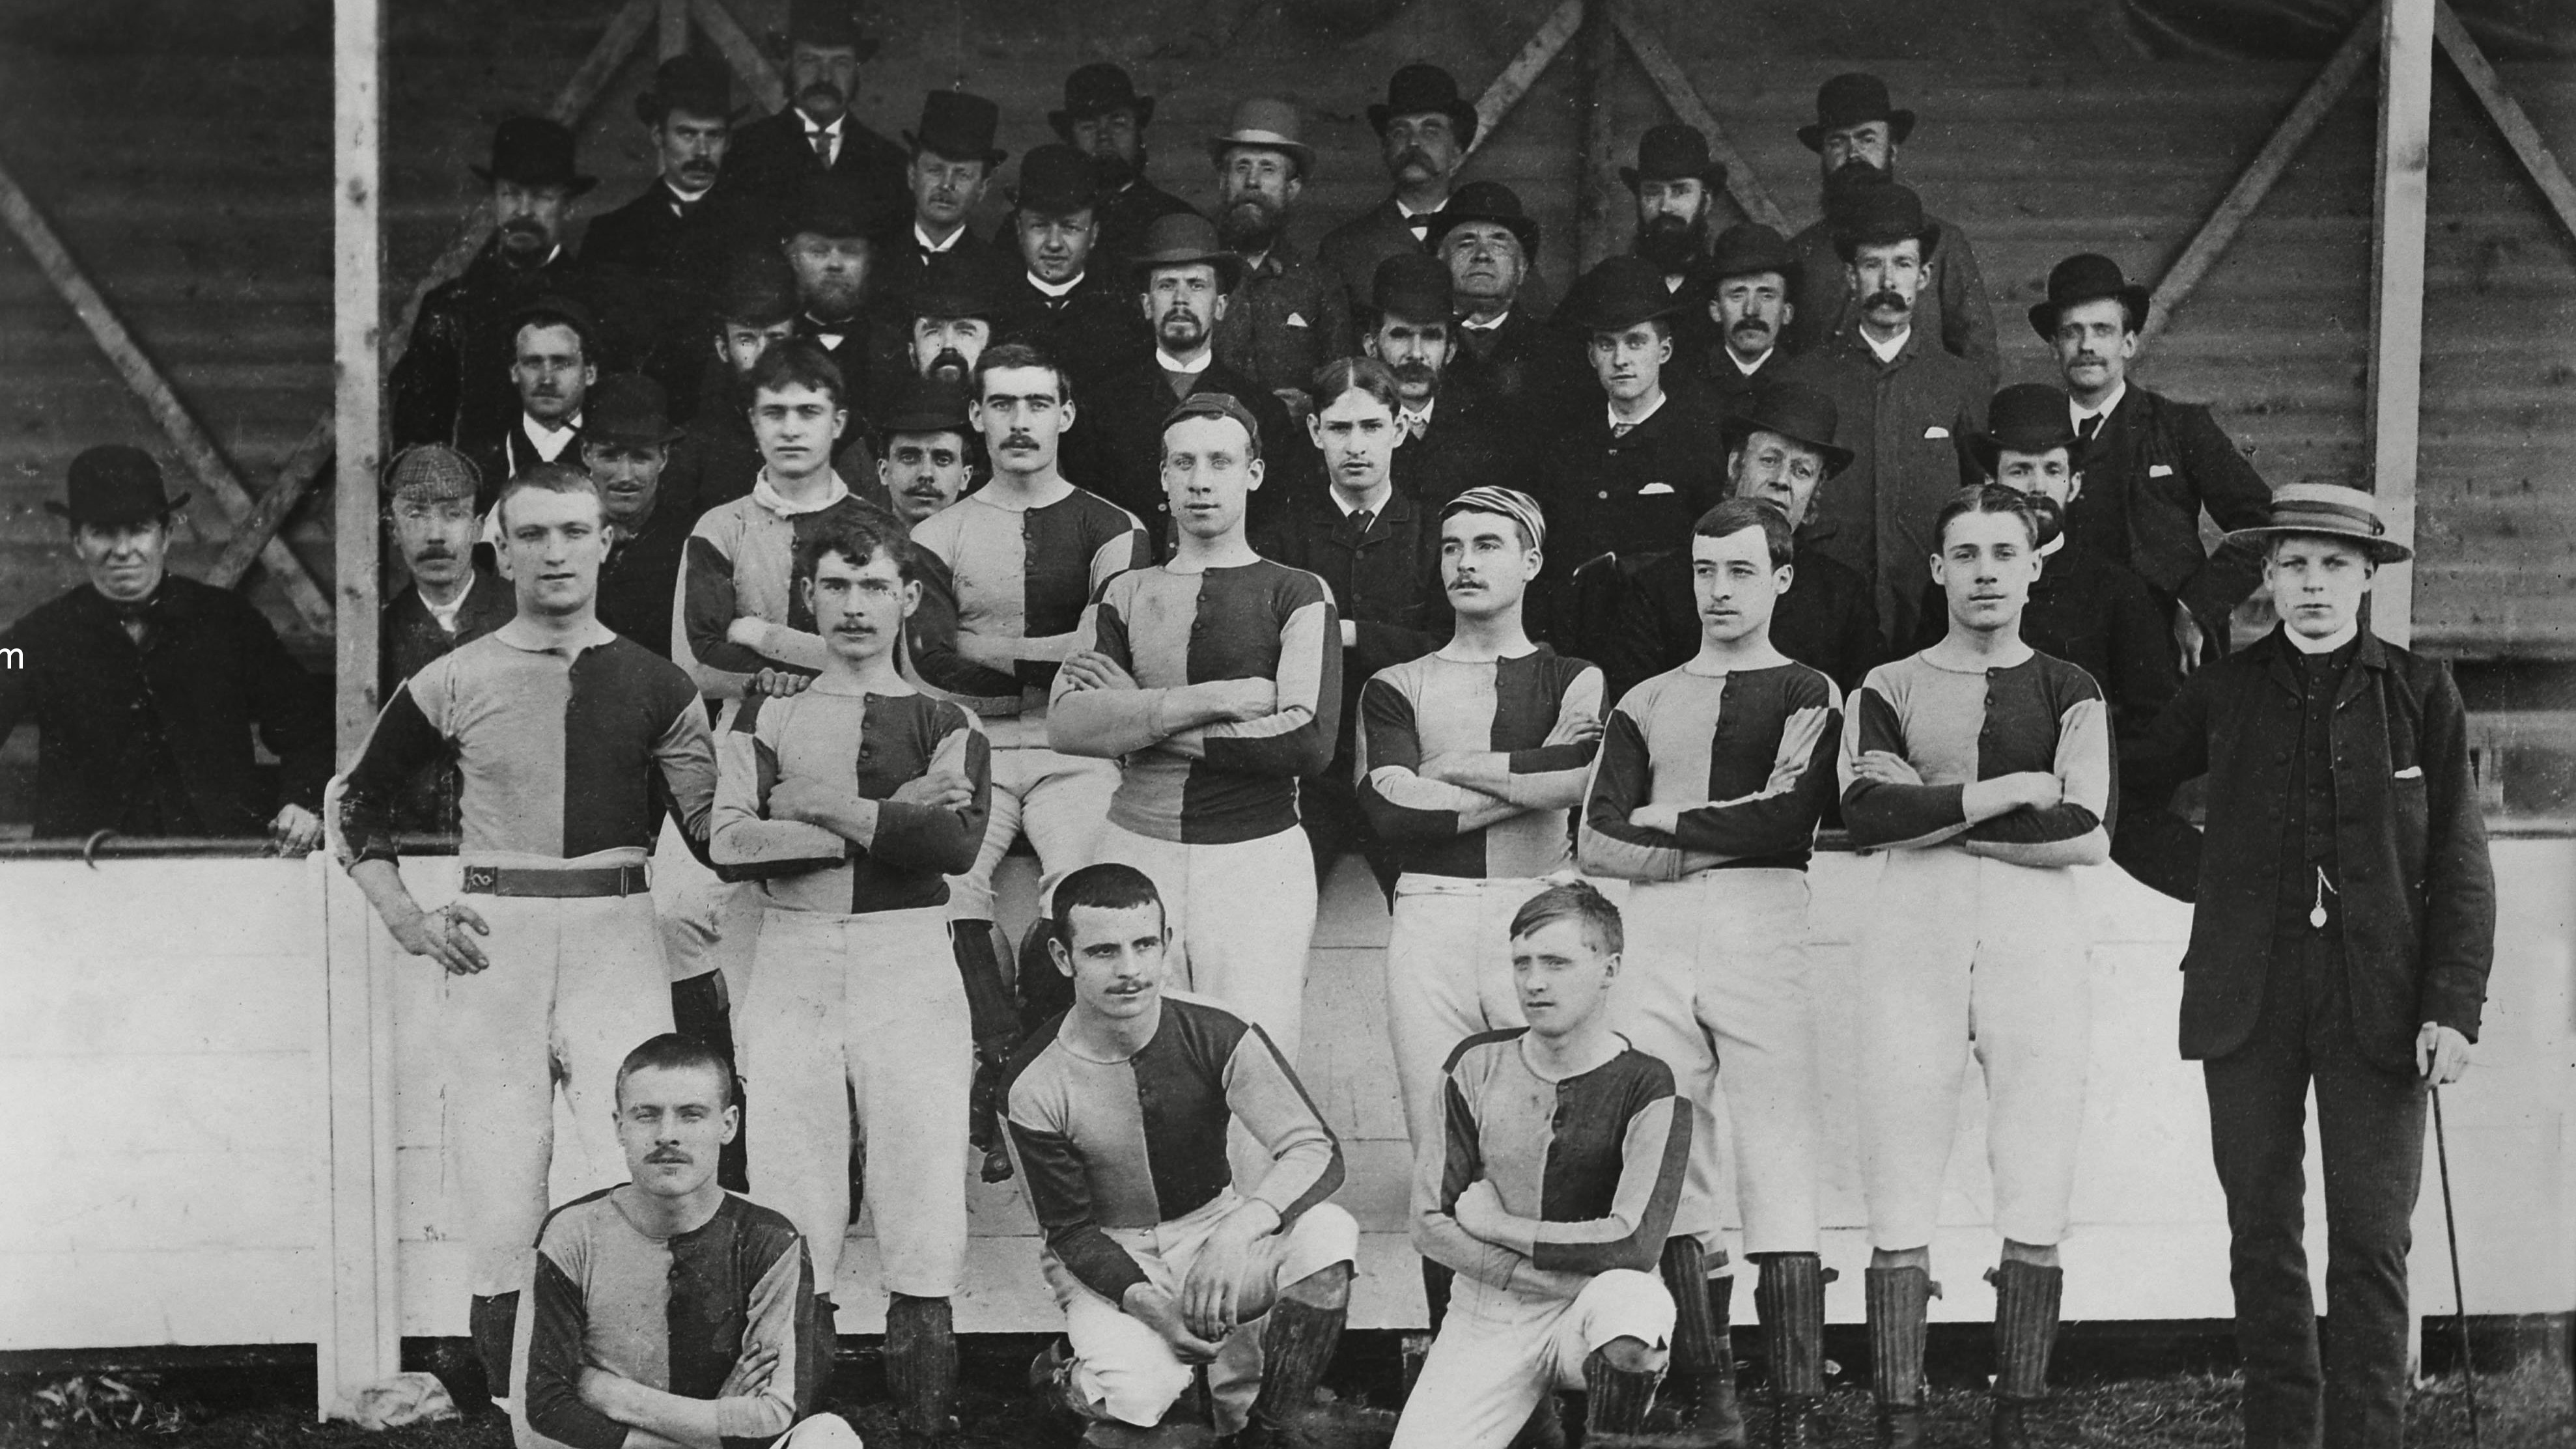 A photo of the 1885-86 West Brom team